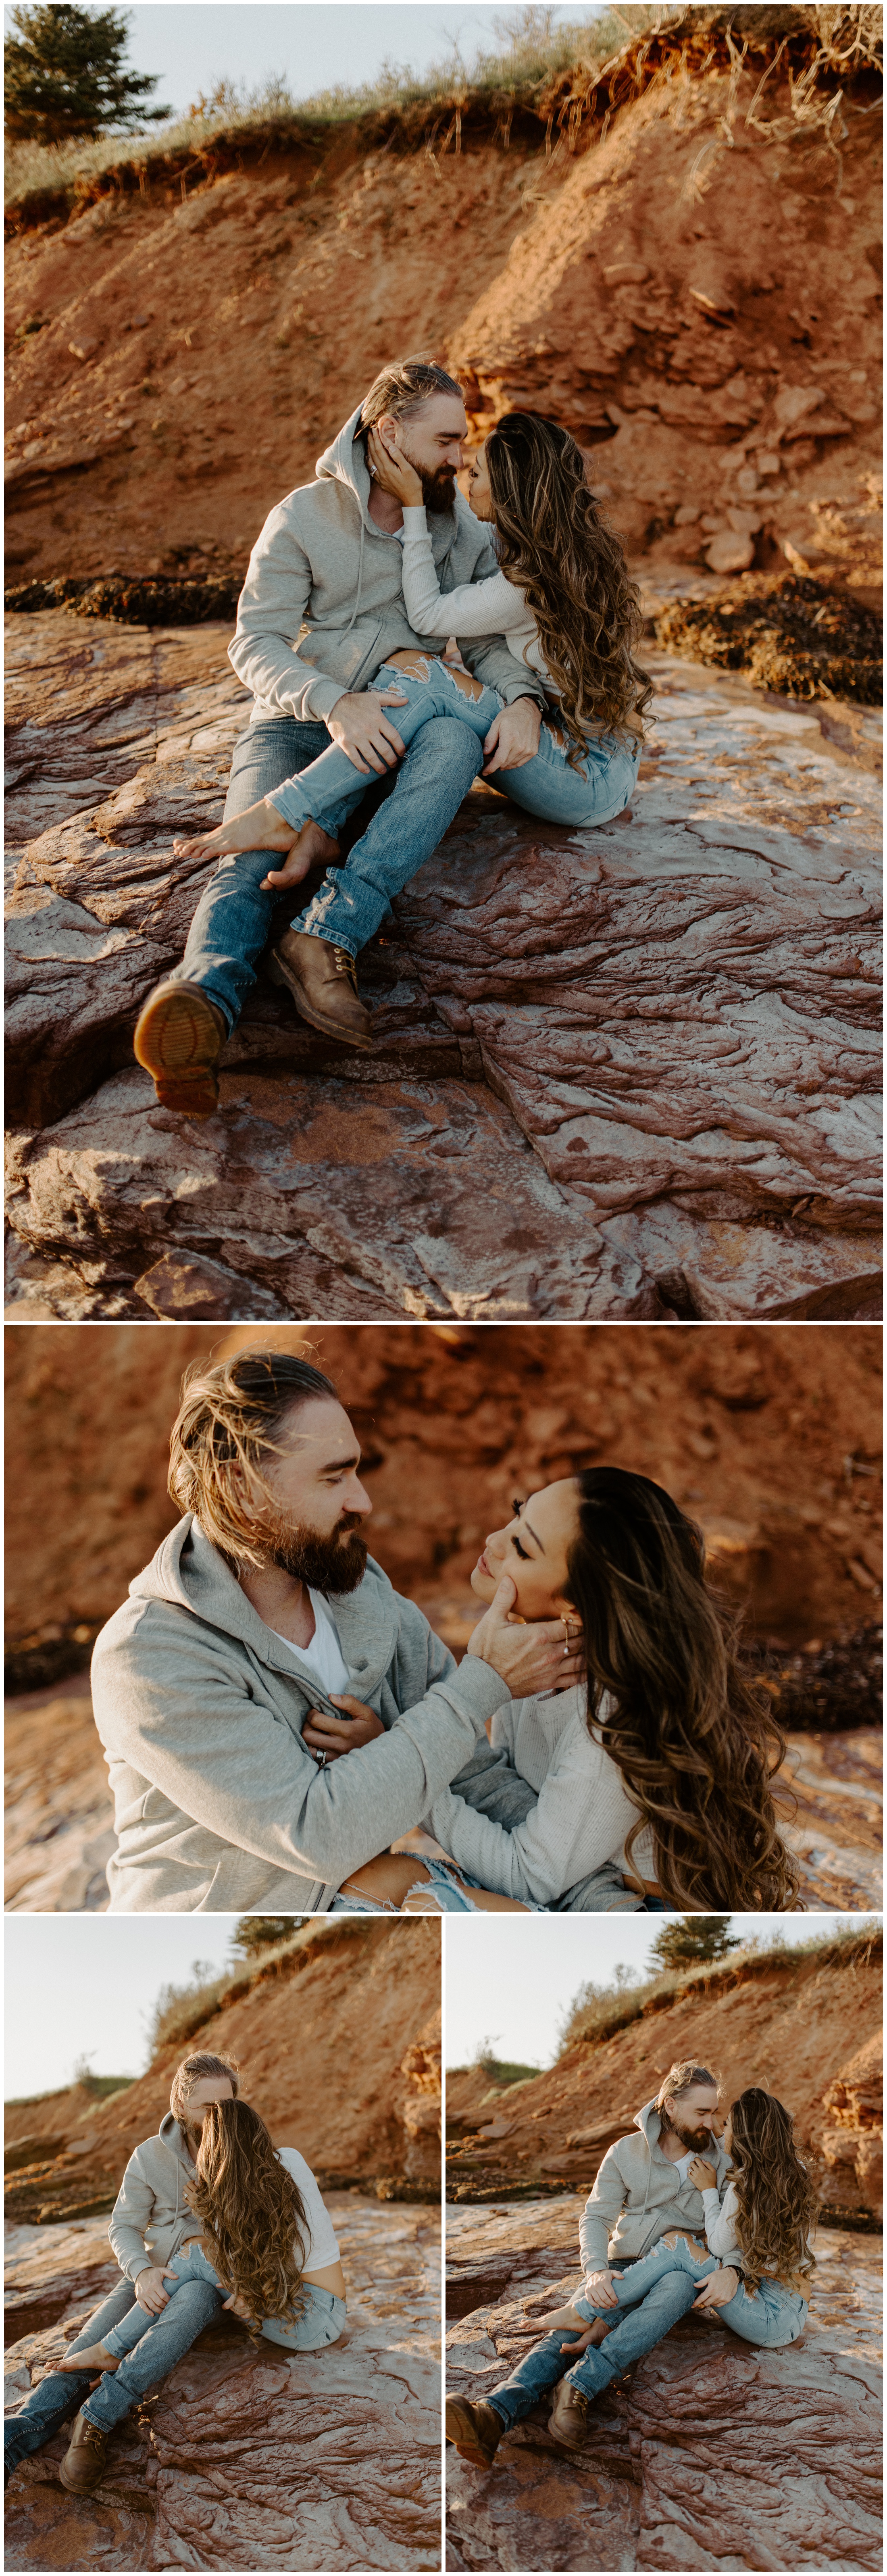 Red Sand Beach Engagements On Prince Edward Island at Sunset | Jessica Heron Images_0009.jpg